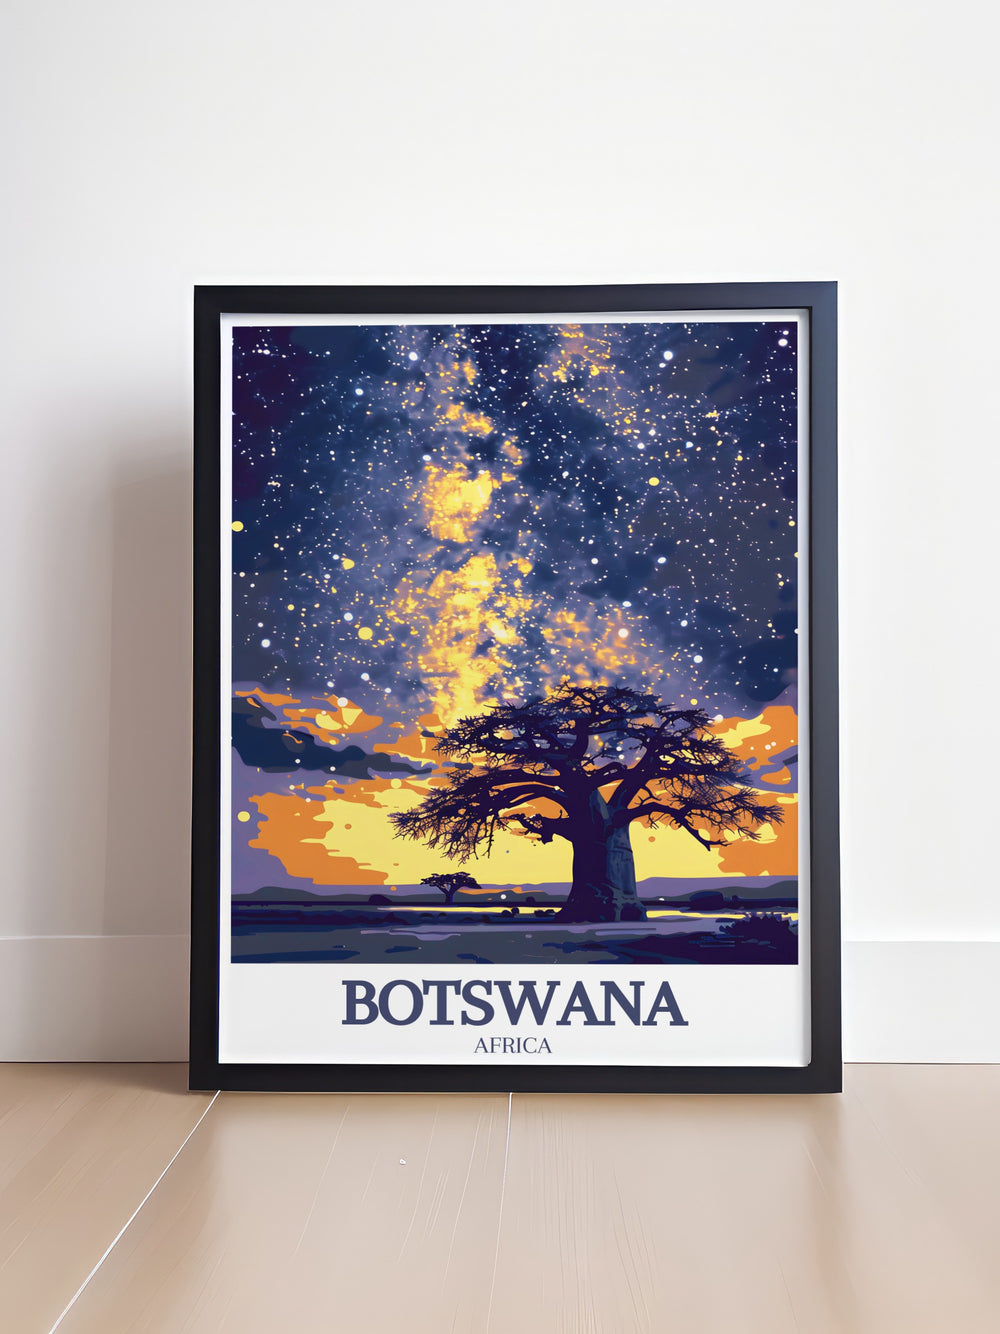 Botswana travel art showcasing the Kalahari basin and Makgadikgadi Pans. Enhance your home with breathtaking Botswana posters and prints that bring the serenity and natural wonders of these iconic landscapes to your walls.